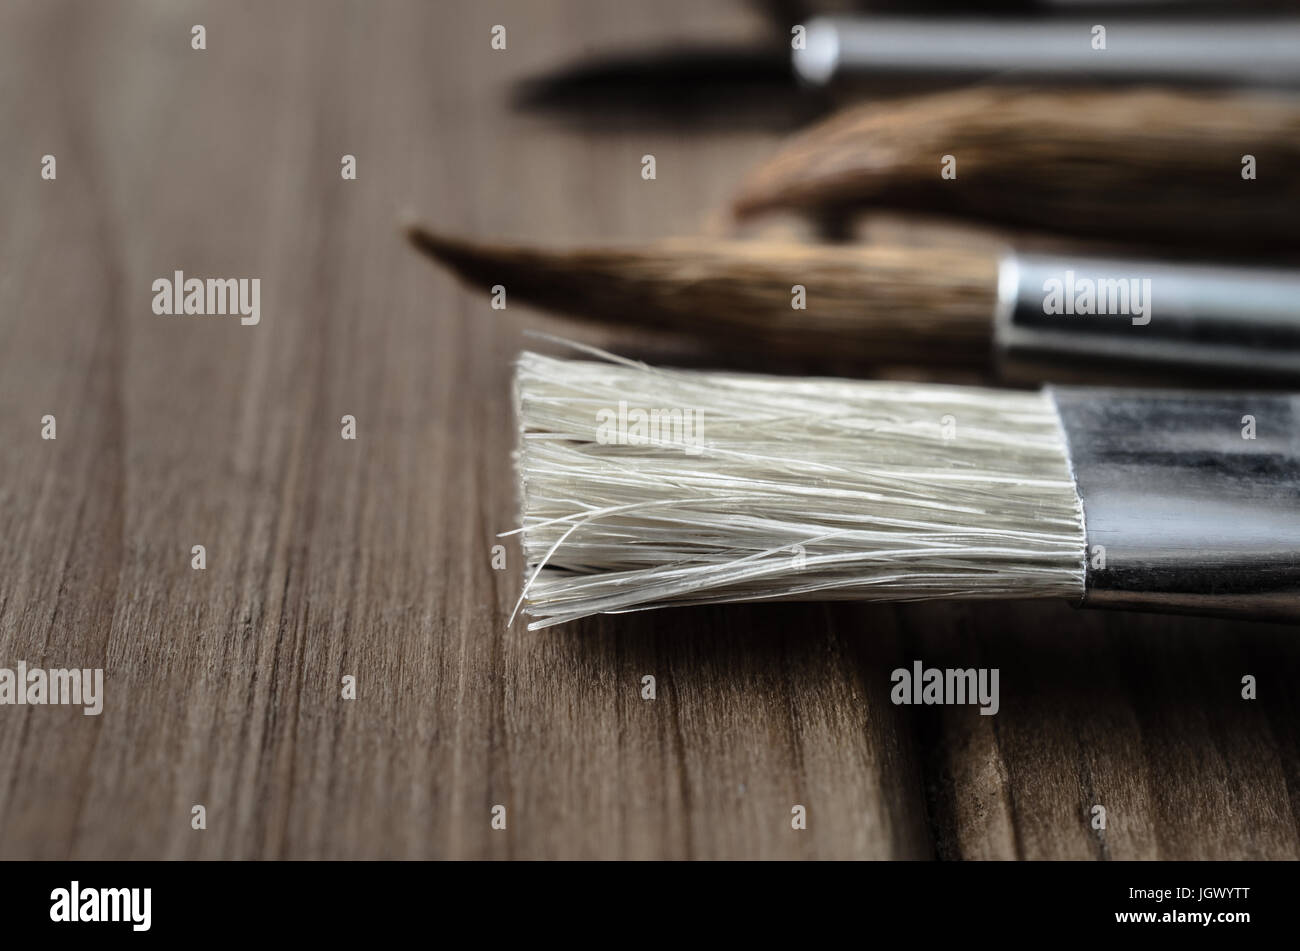 Side view close up of a variety of artist's paintbrushes, laid out in a row on a wood plank table. Stock Photo